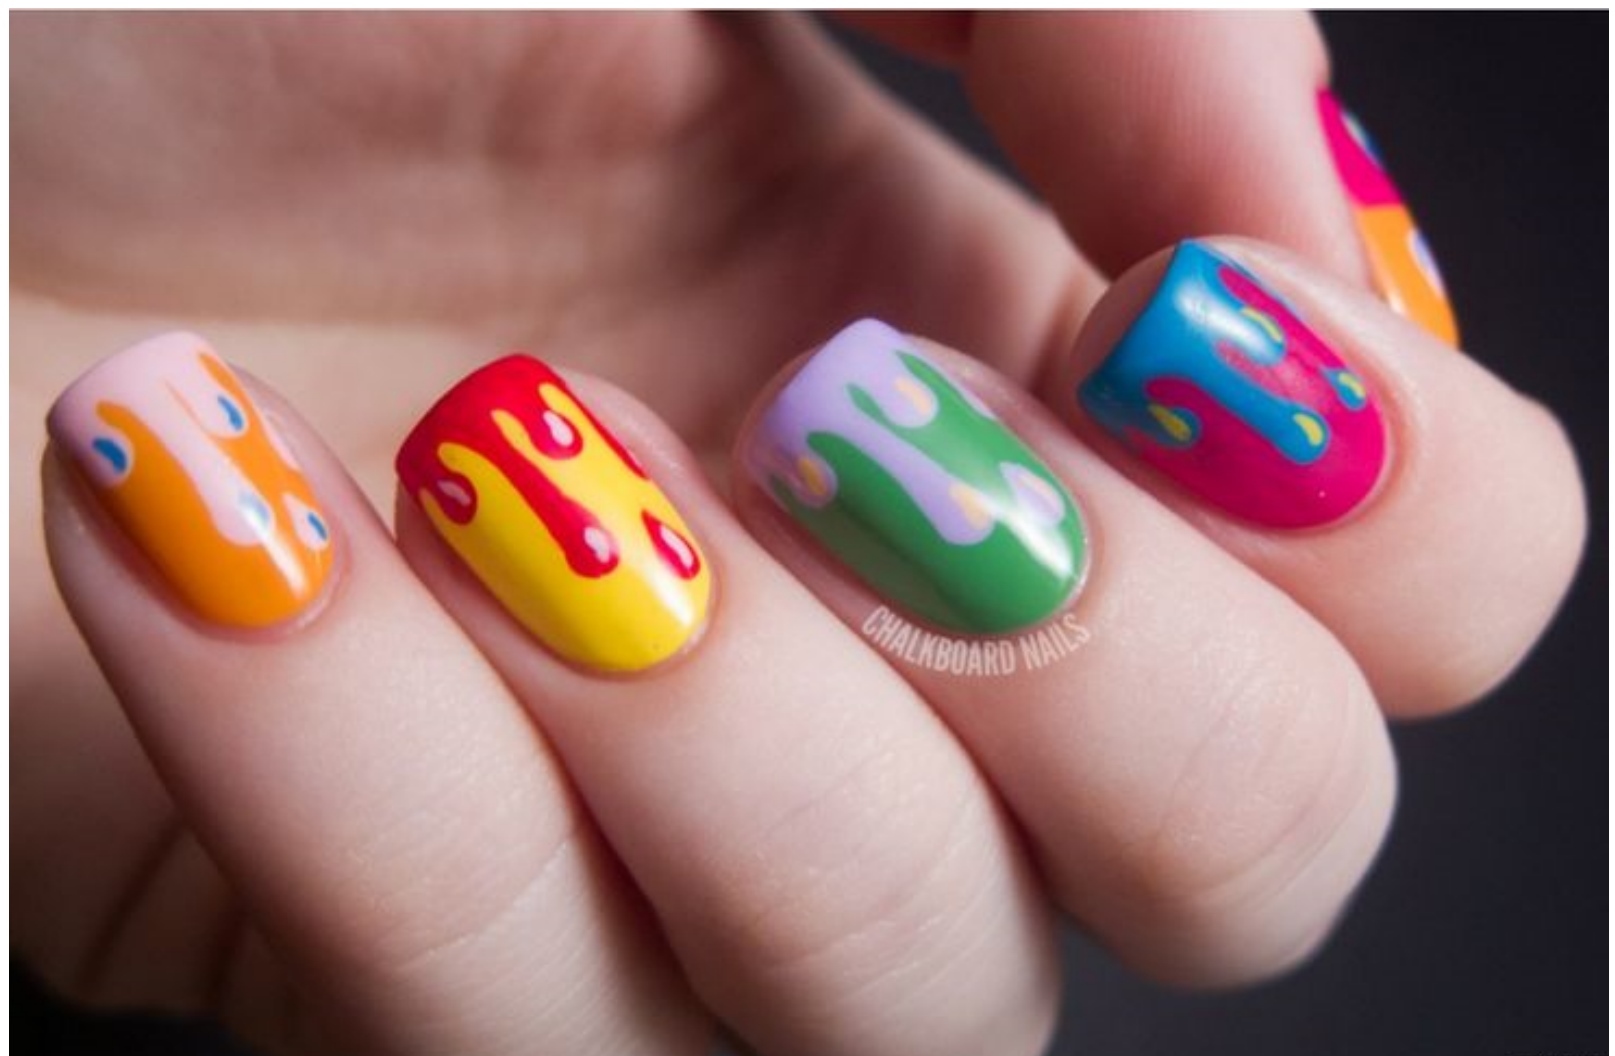 2. Cute Nail Designs for Teenagers - wide 6